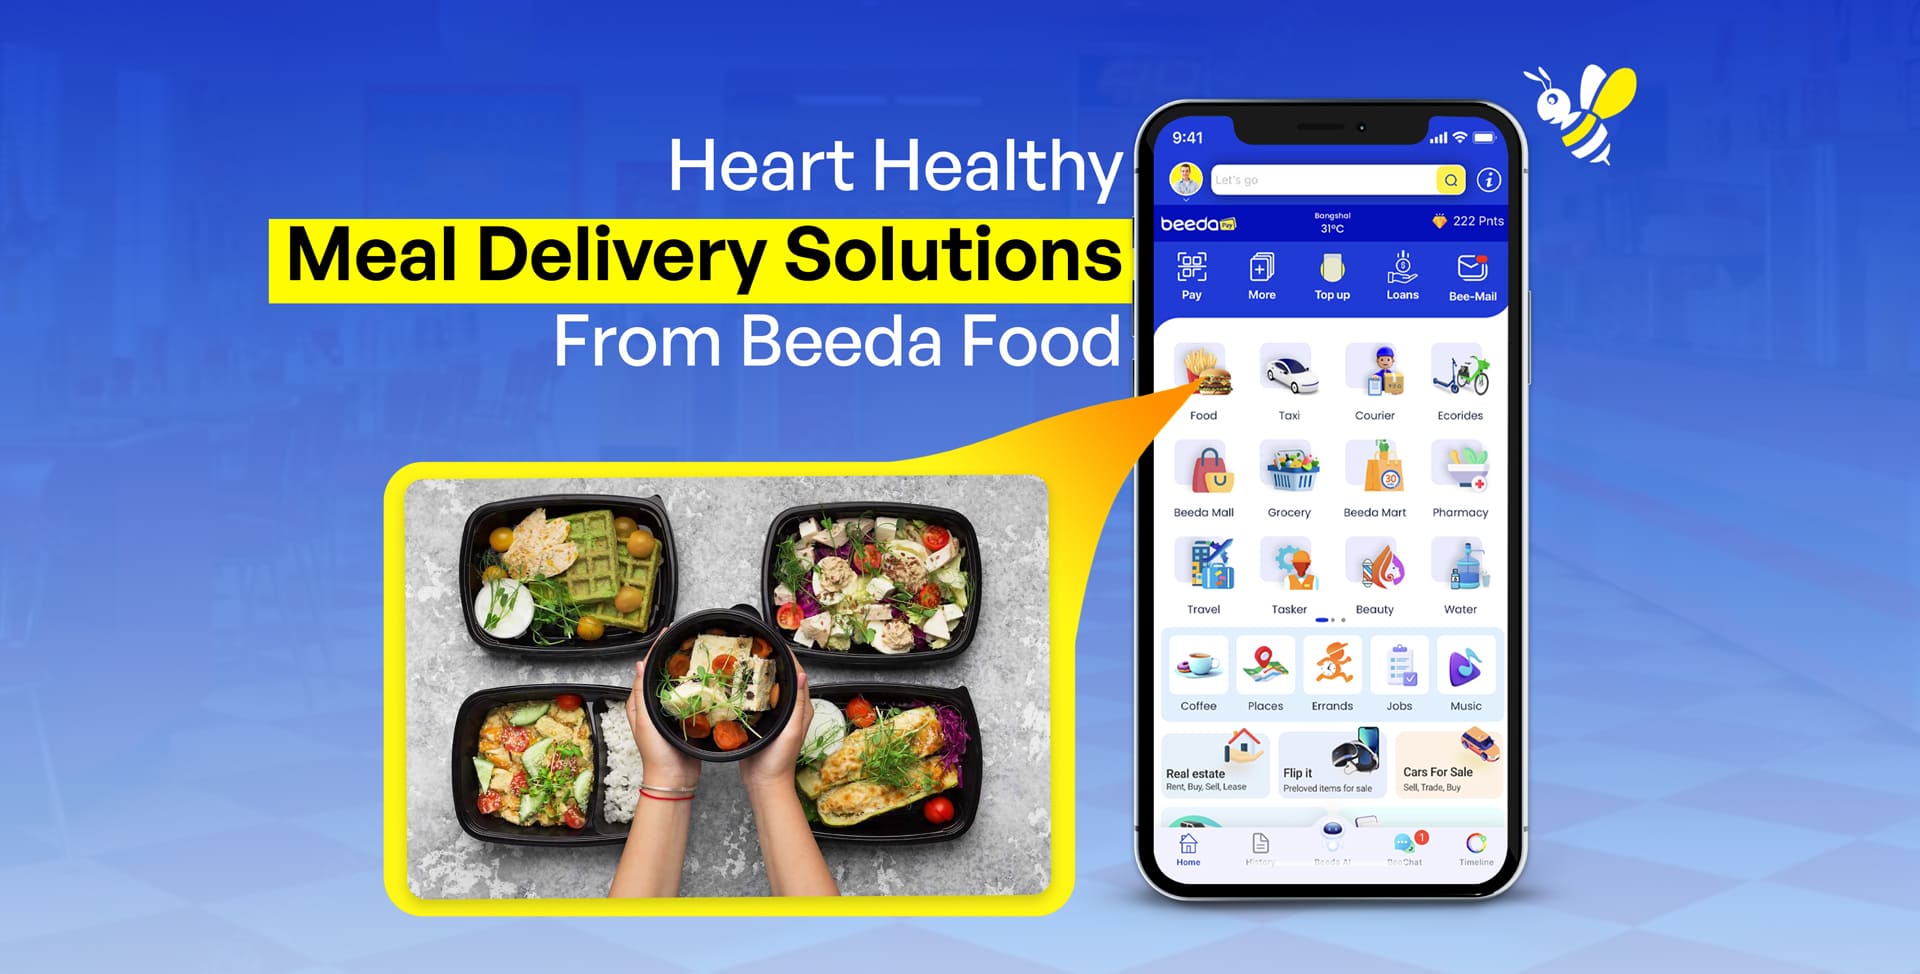 Heart Healthy Meal Delivery Service from Beeda Food